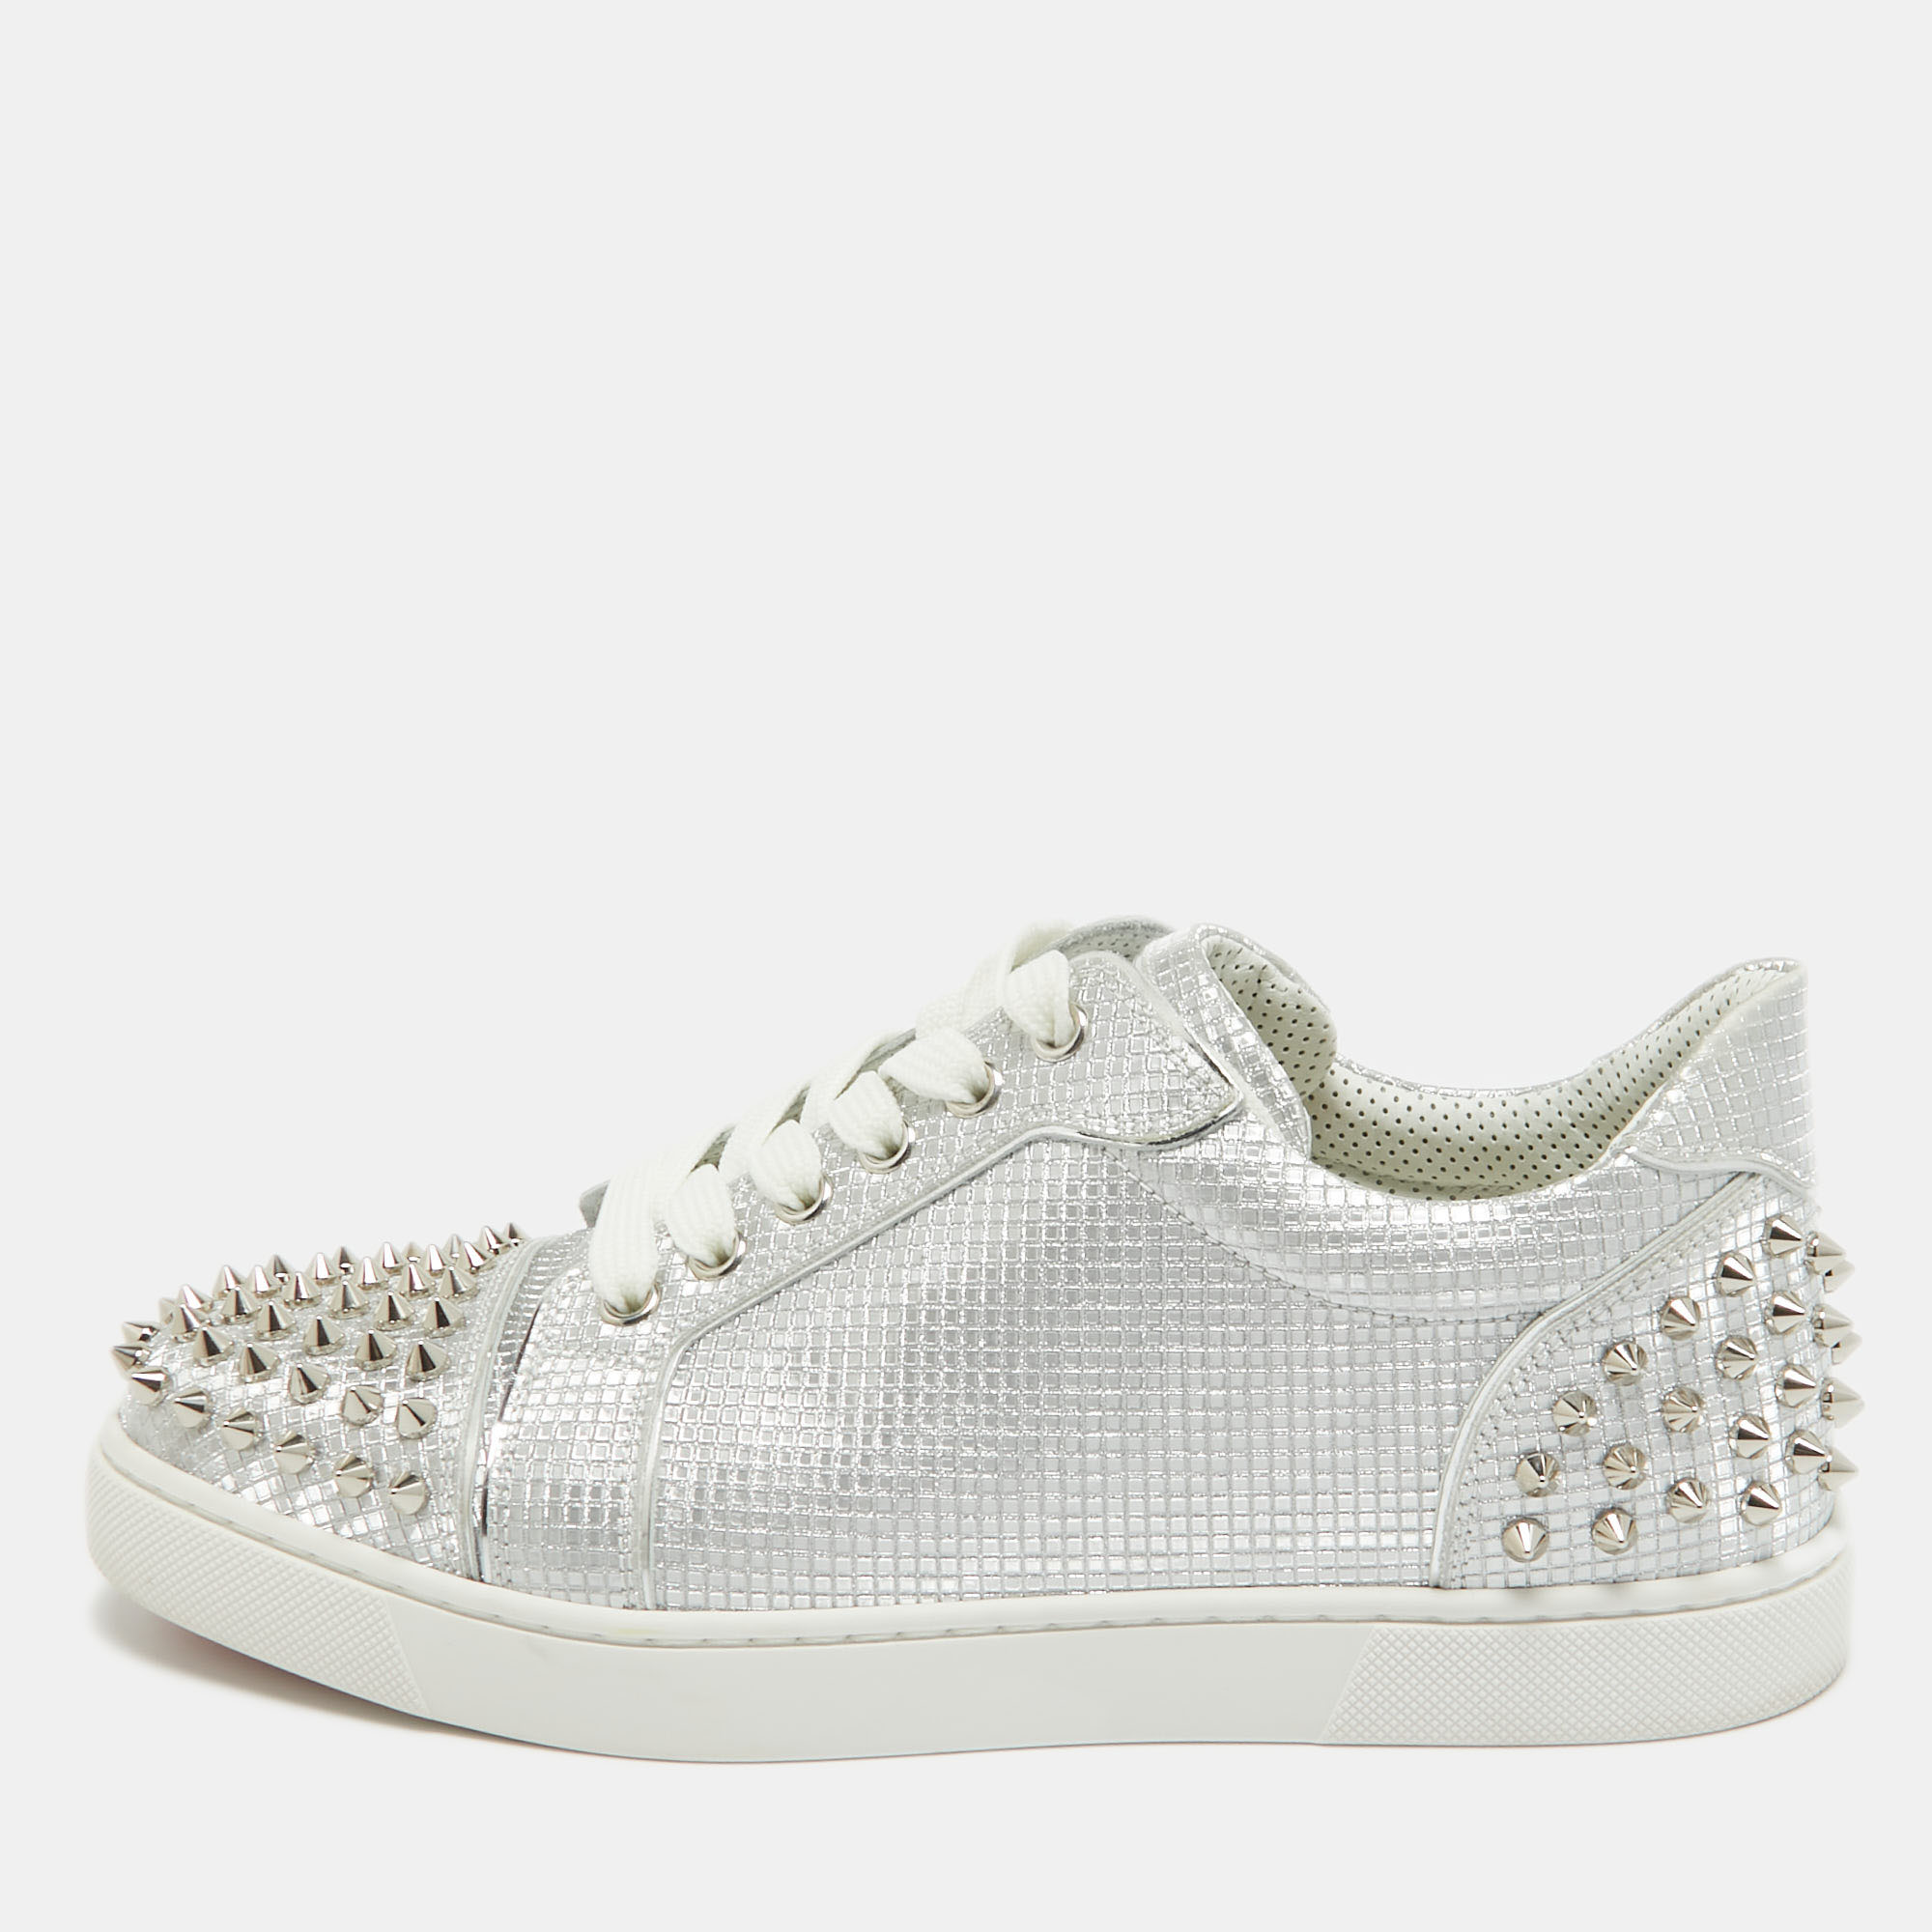 Pre-owned Christian Louboutin Silver Fabric Vieira 2 Spikes Sneakers Size 39.5